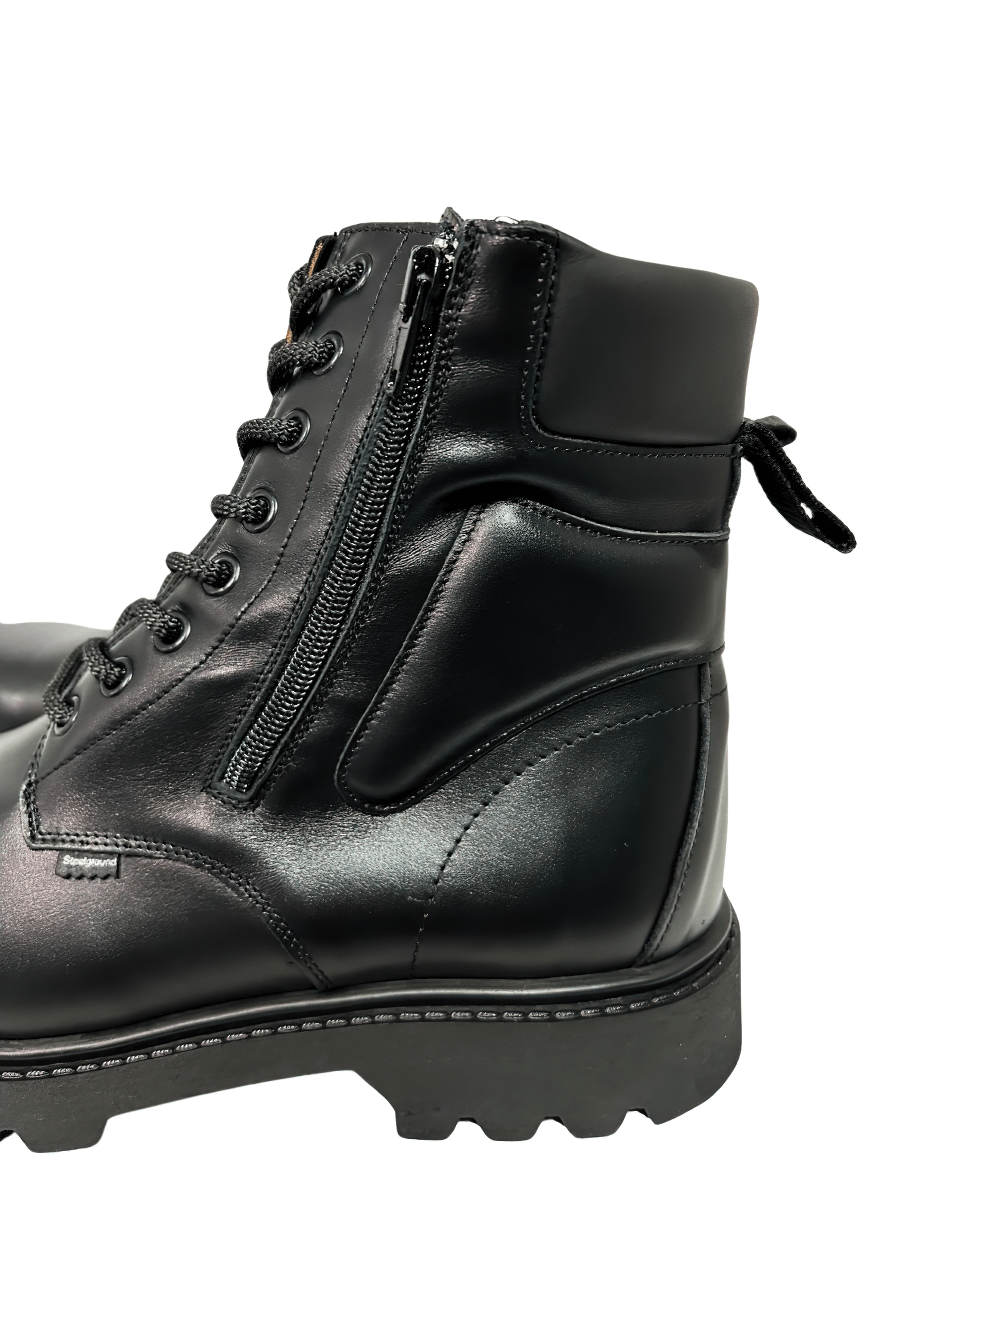 Black Leather Tactical Lace-Up Boots with Rubber Sole